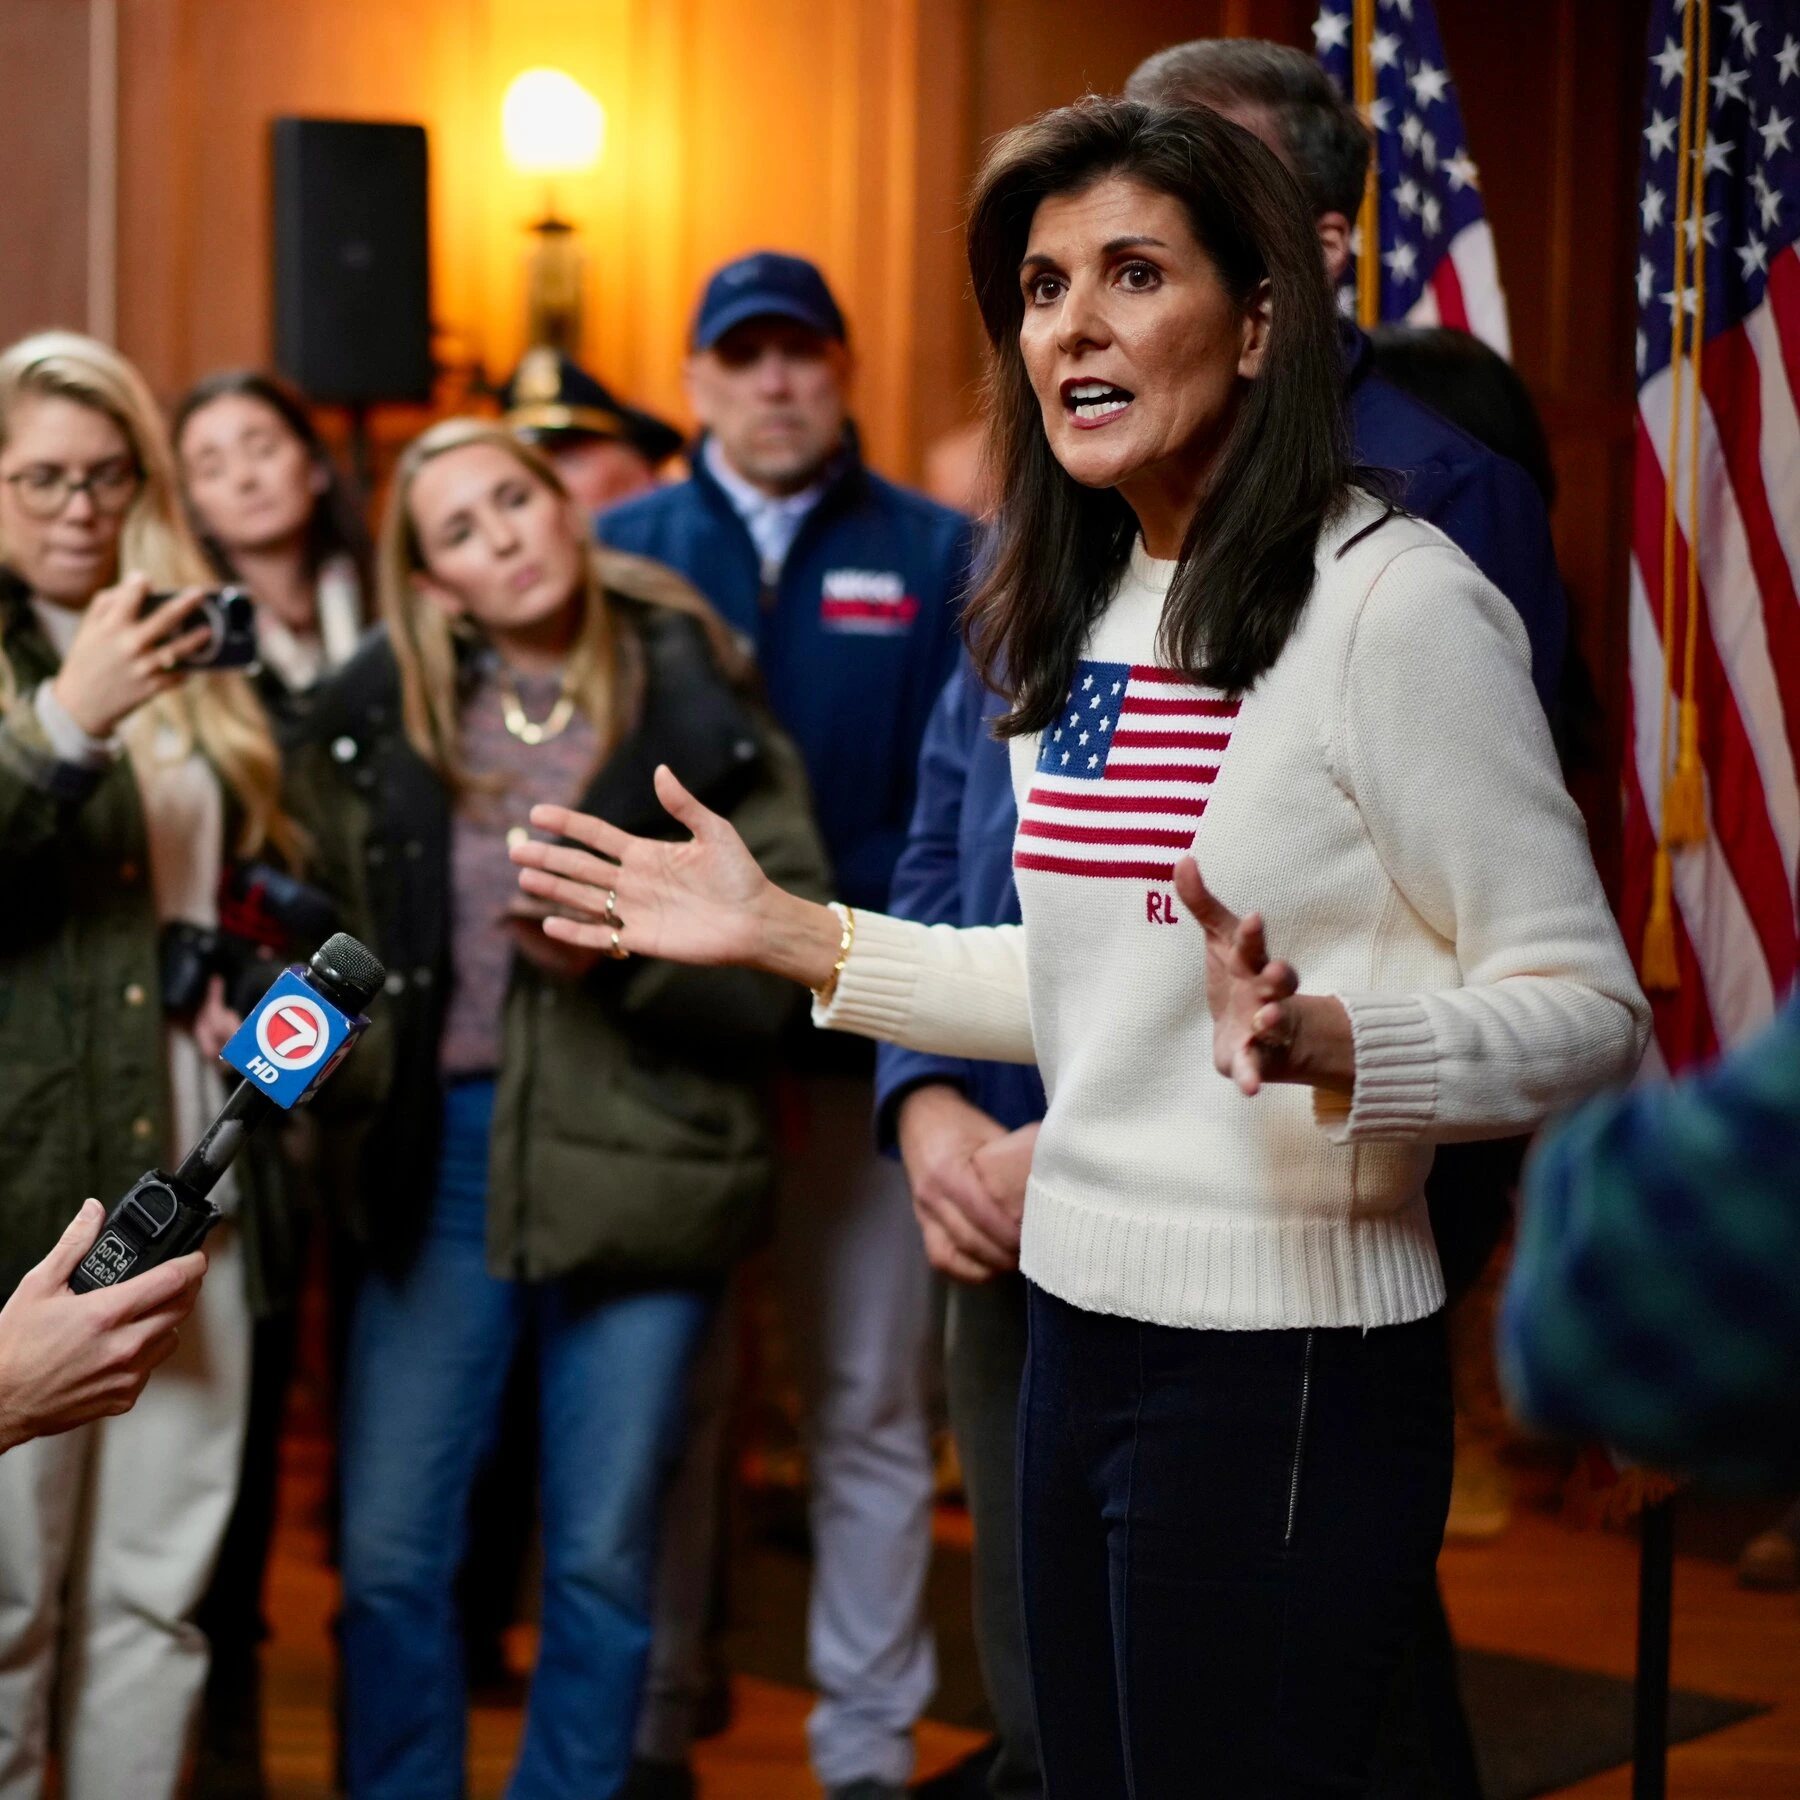 Nikki Haley Misidentified as Nancy Pelosi by Trump, Igniting Mental Fitness Concerns